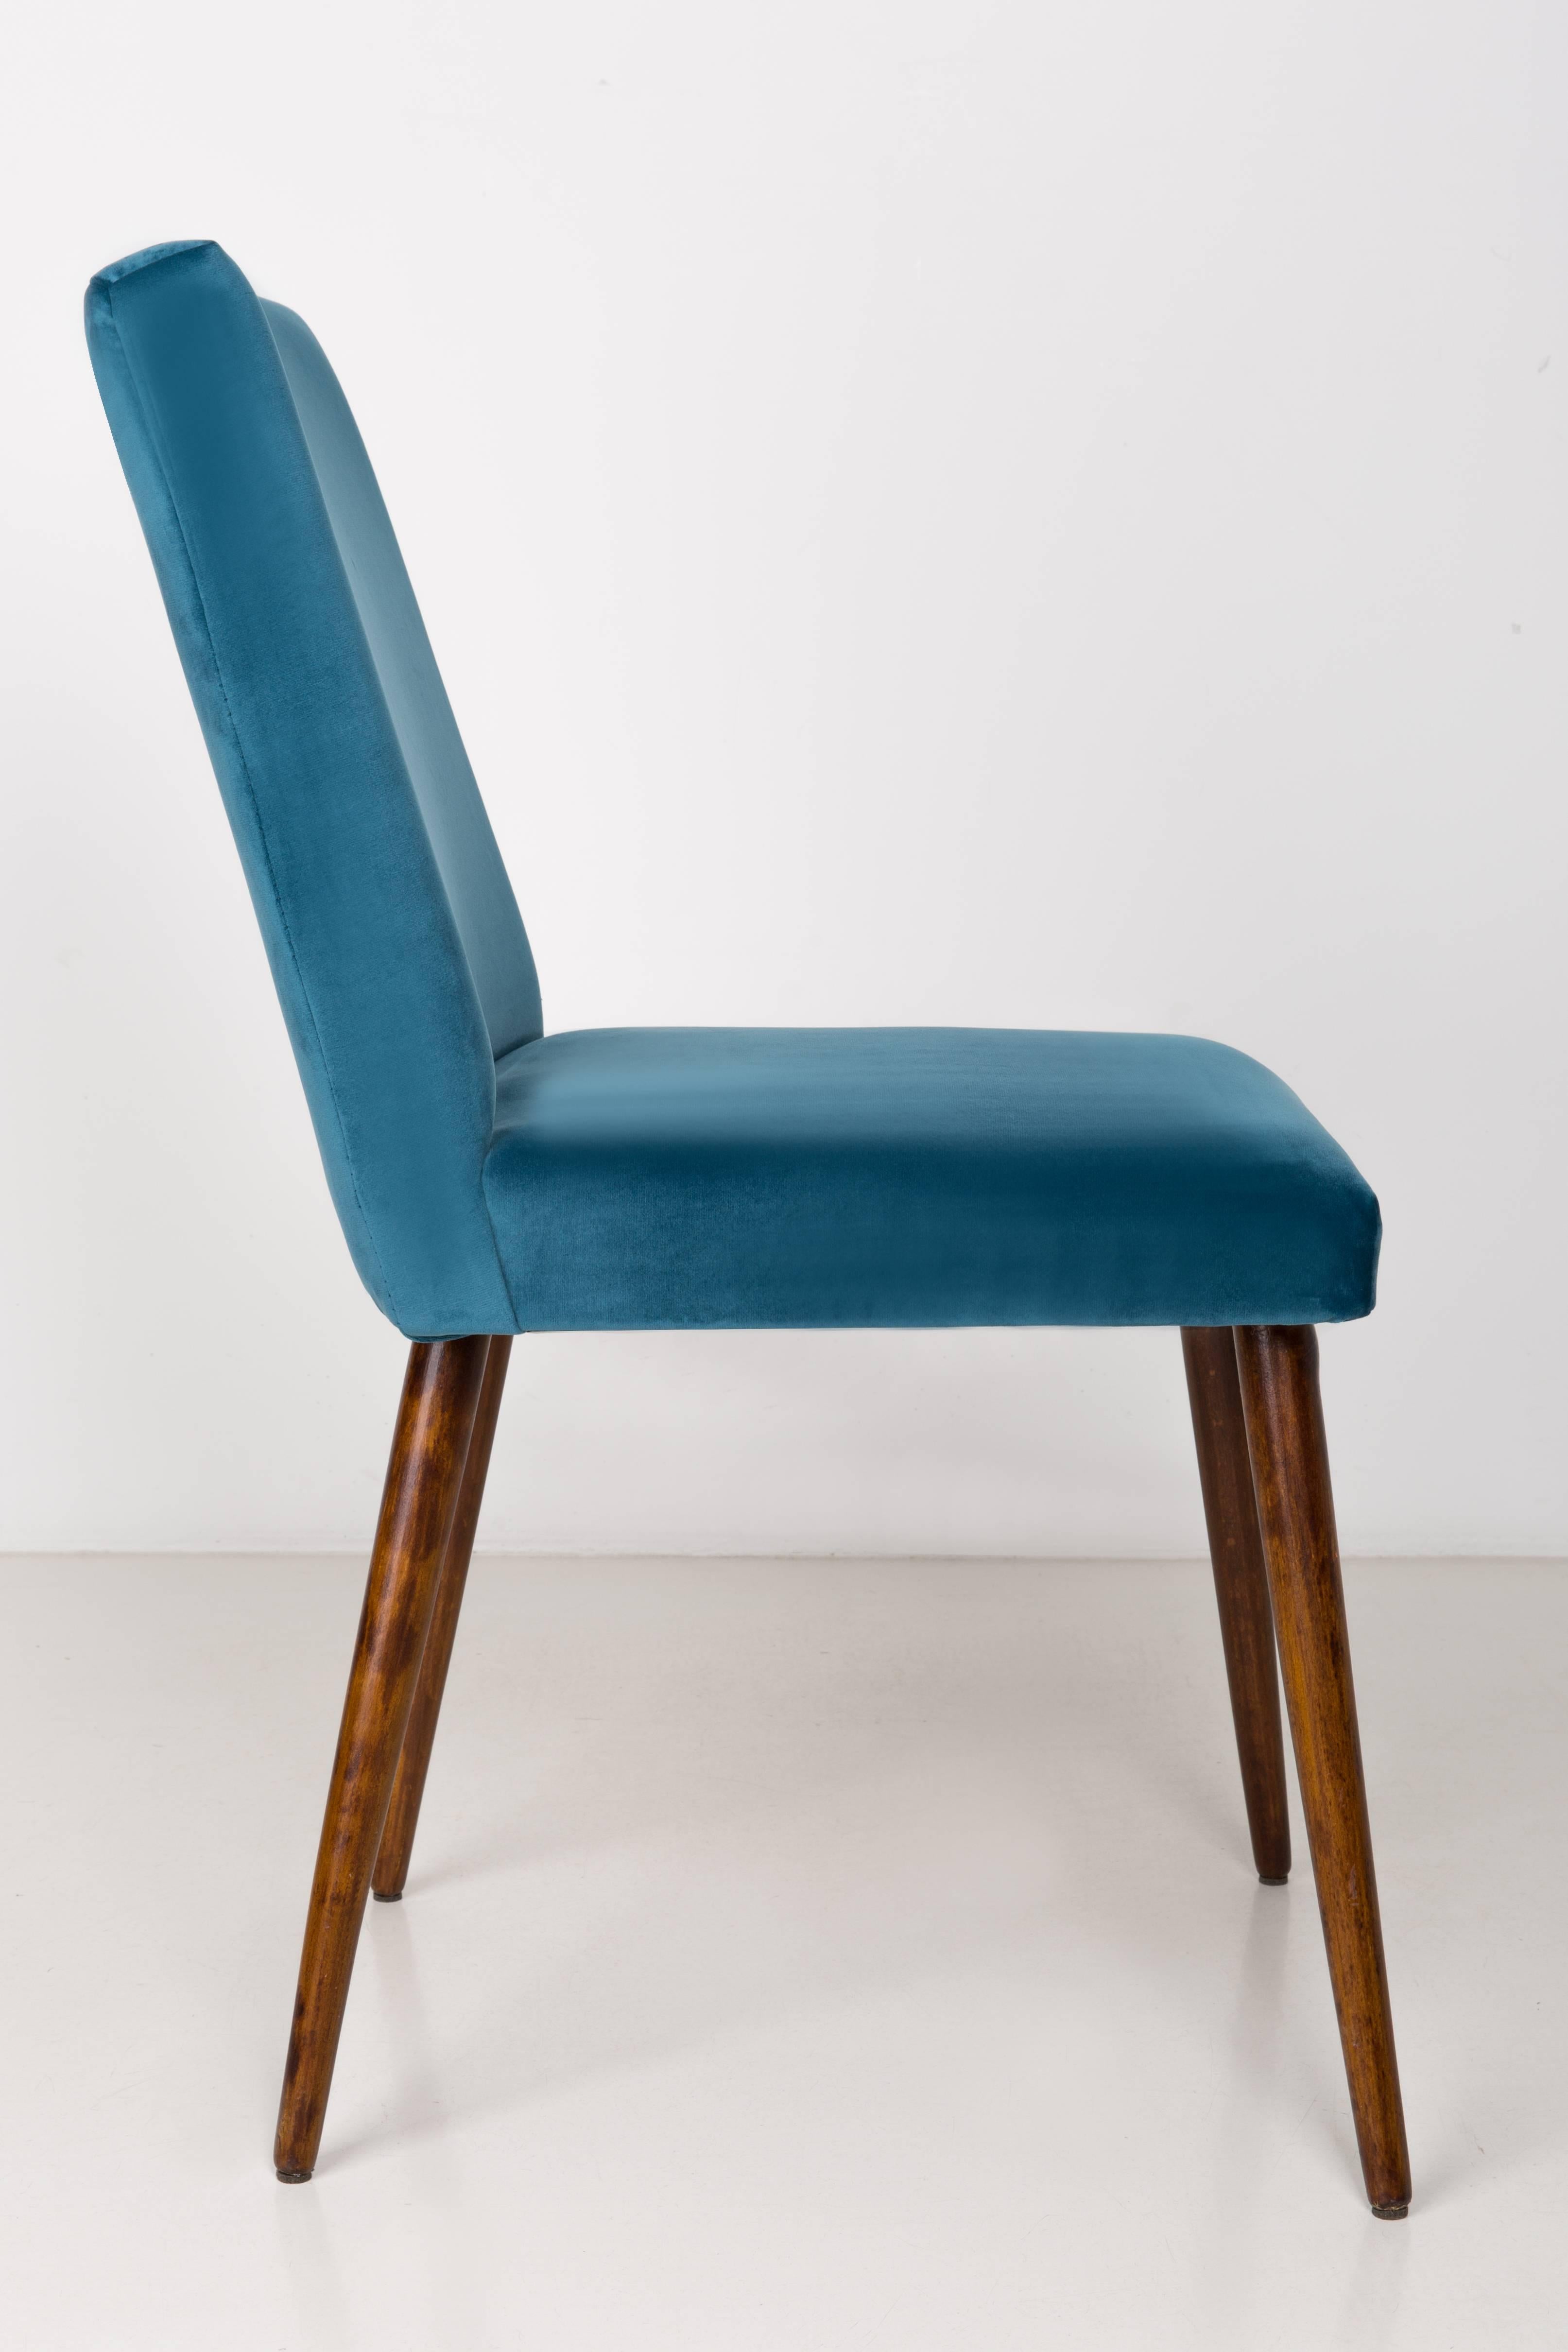 A beautiful chairs produced in the 1960s after a complete upholstery and refreshing of the woodwork, comfortable and stable. The whole is covered with high-quality, durable fabric. We can prepare set of two, four or eight!